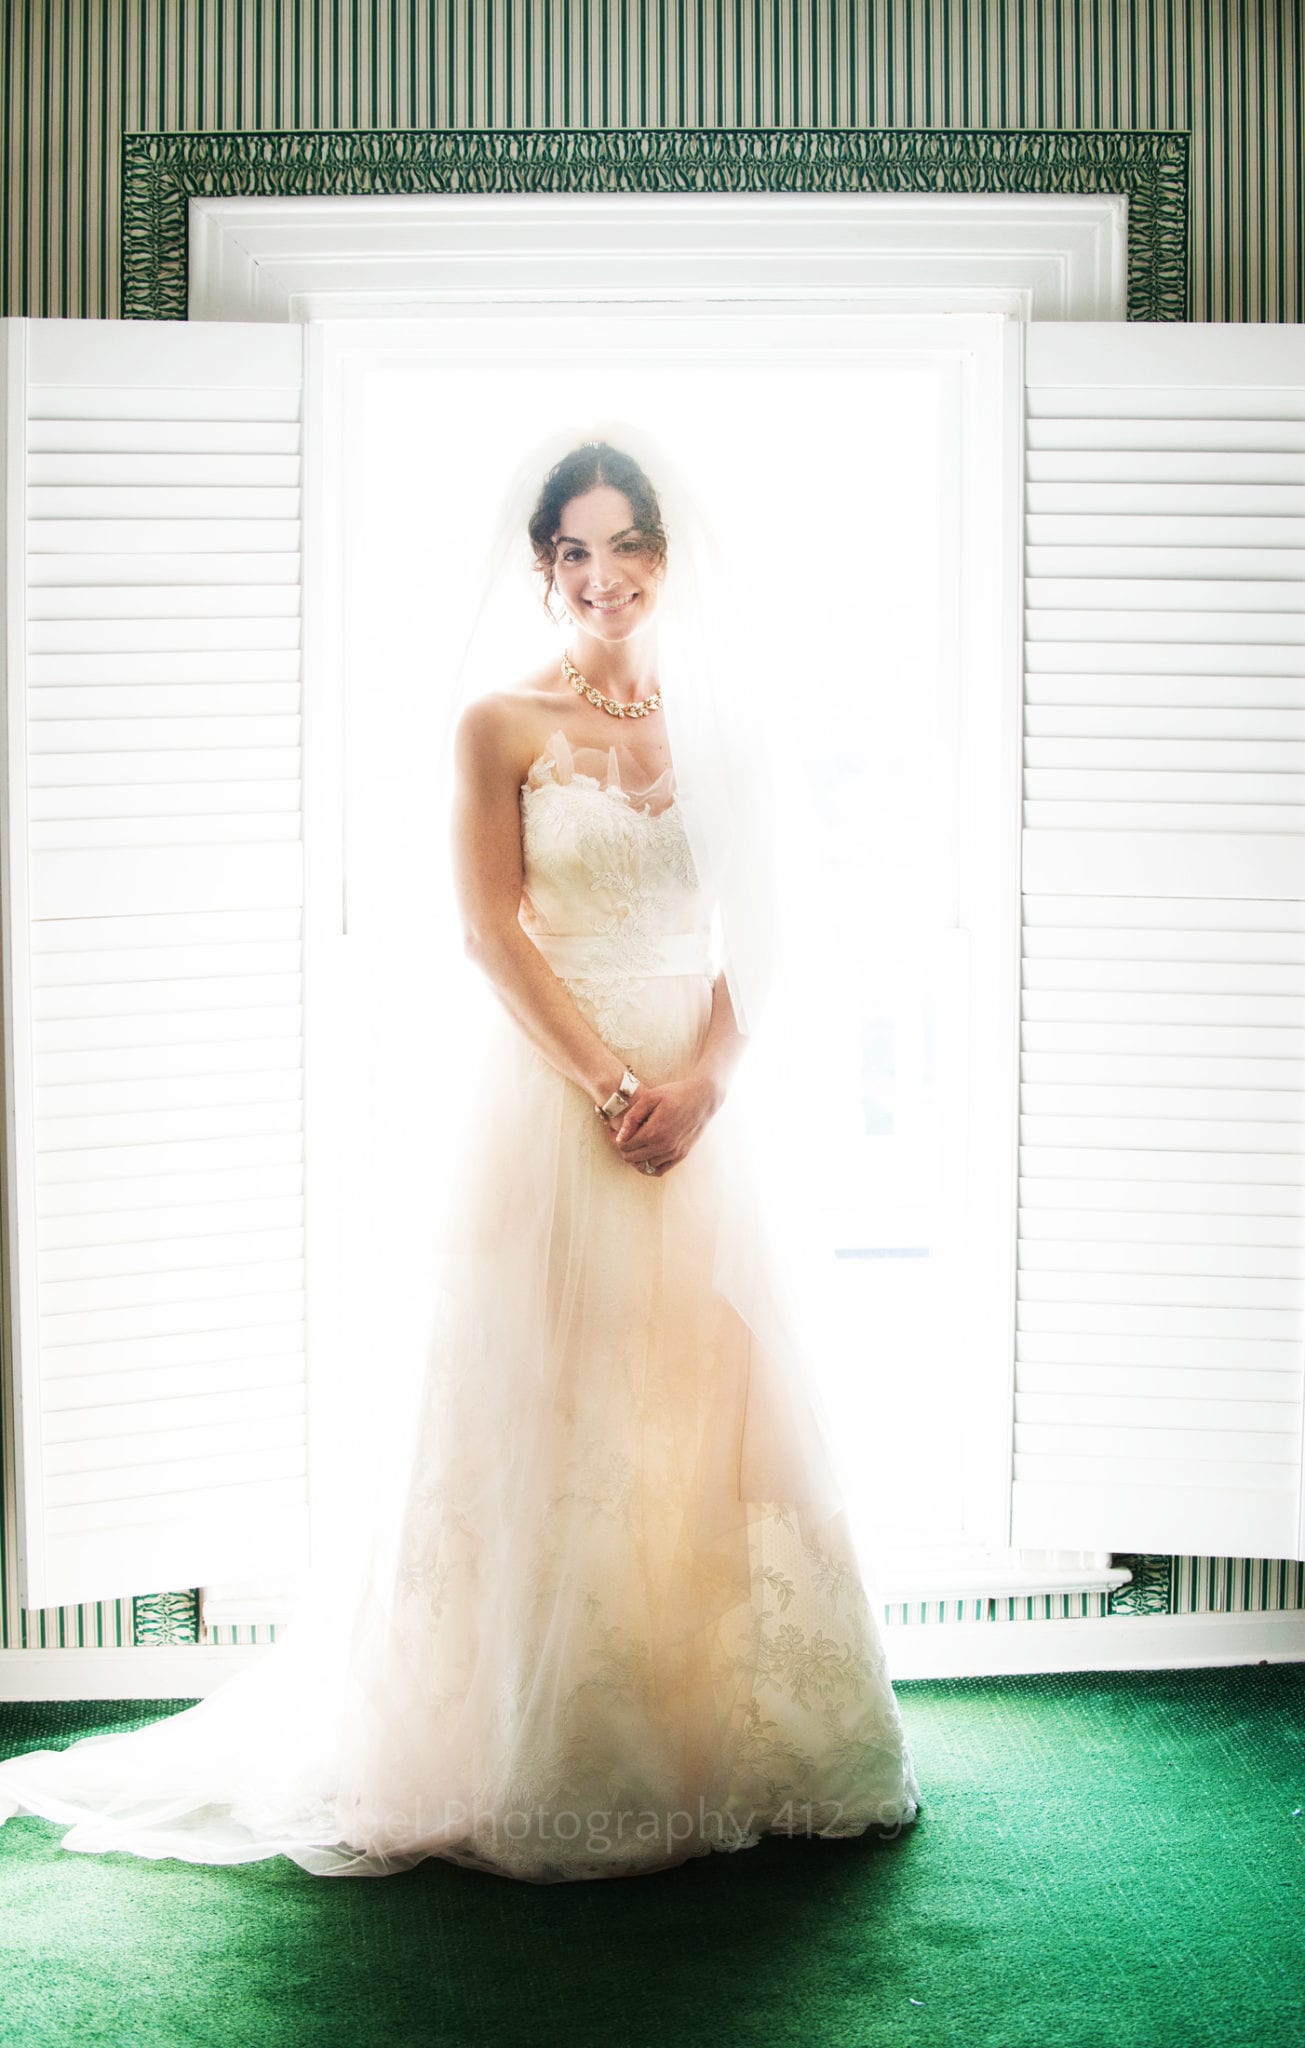 a bride smiles and stands in front of an illuminated window in her wedding dress